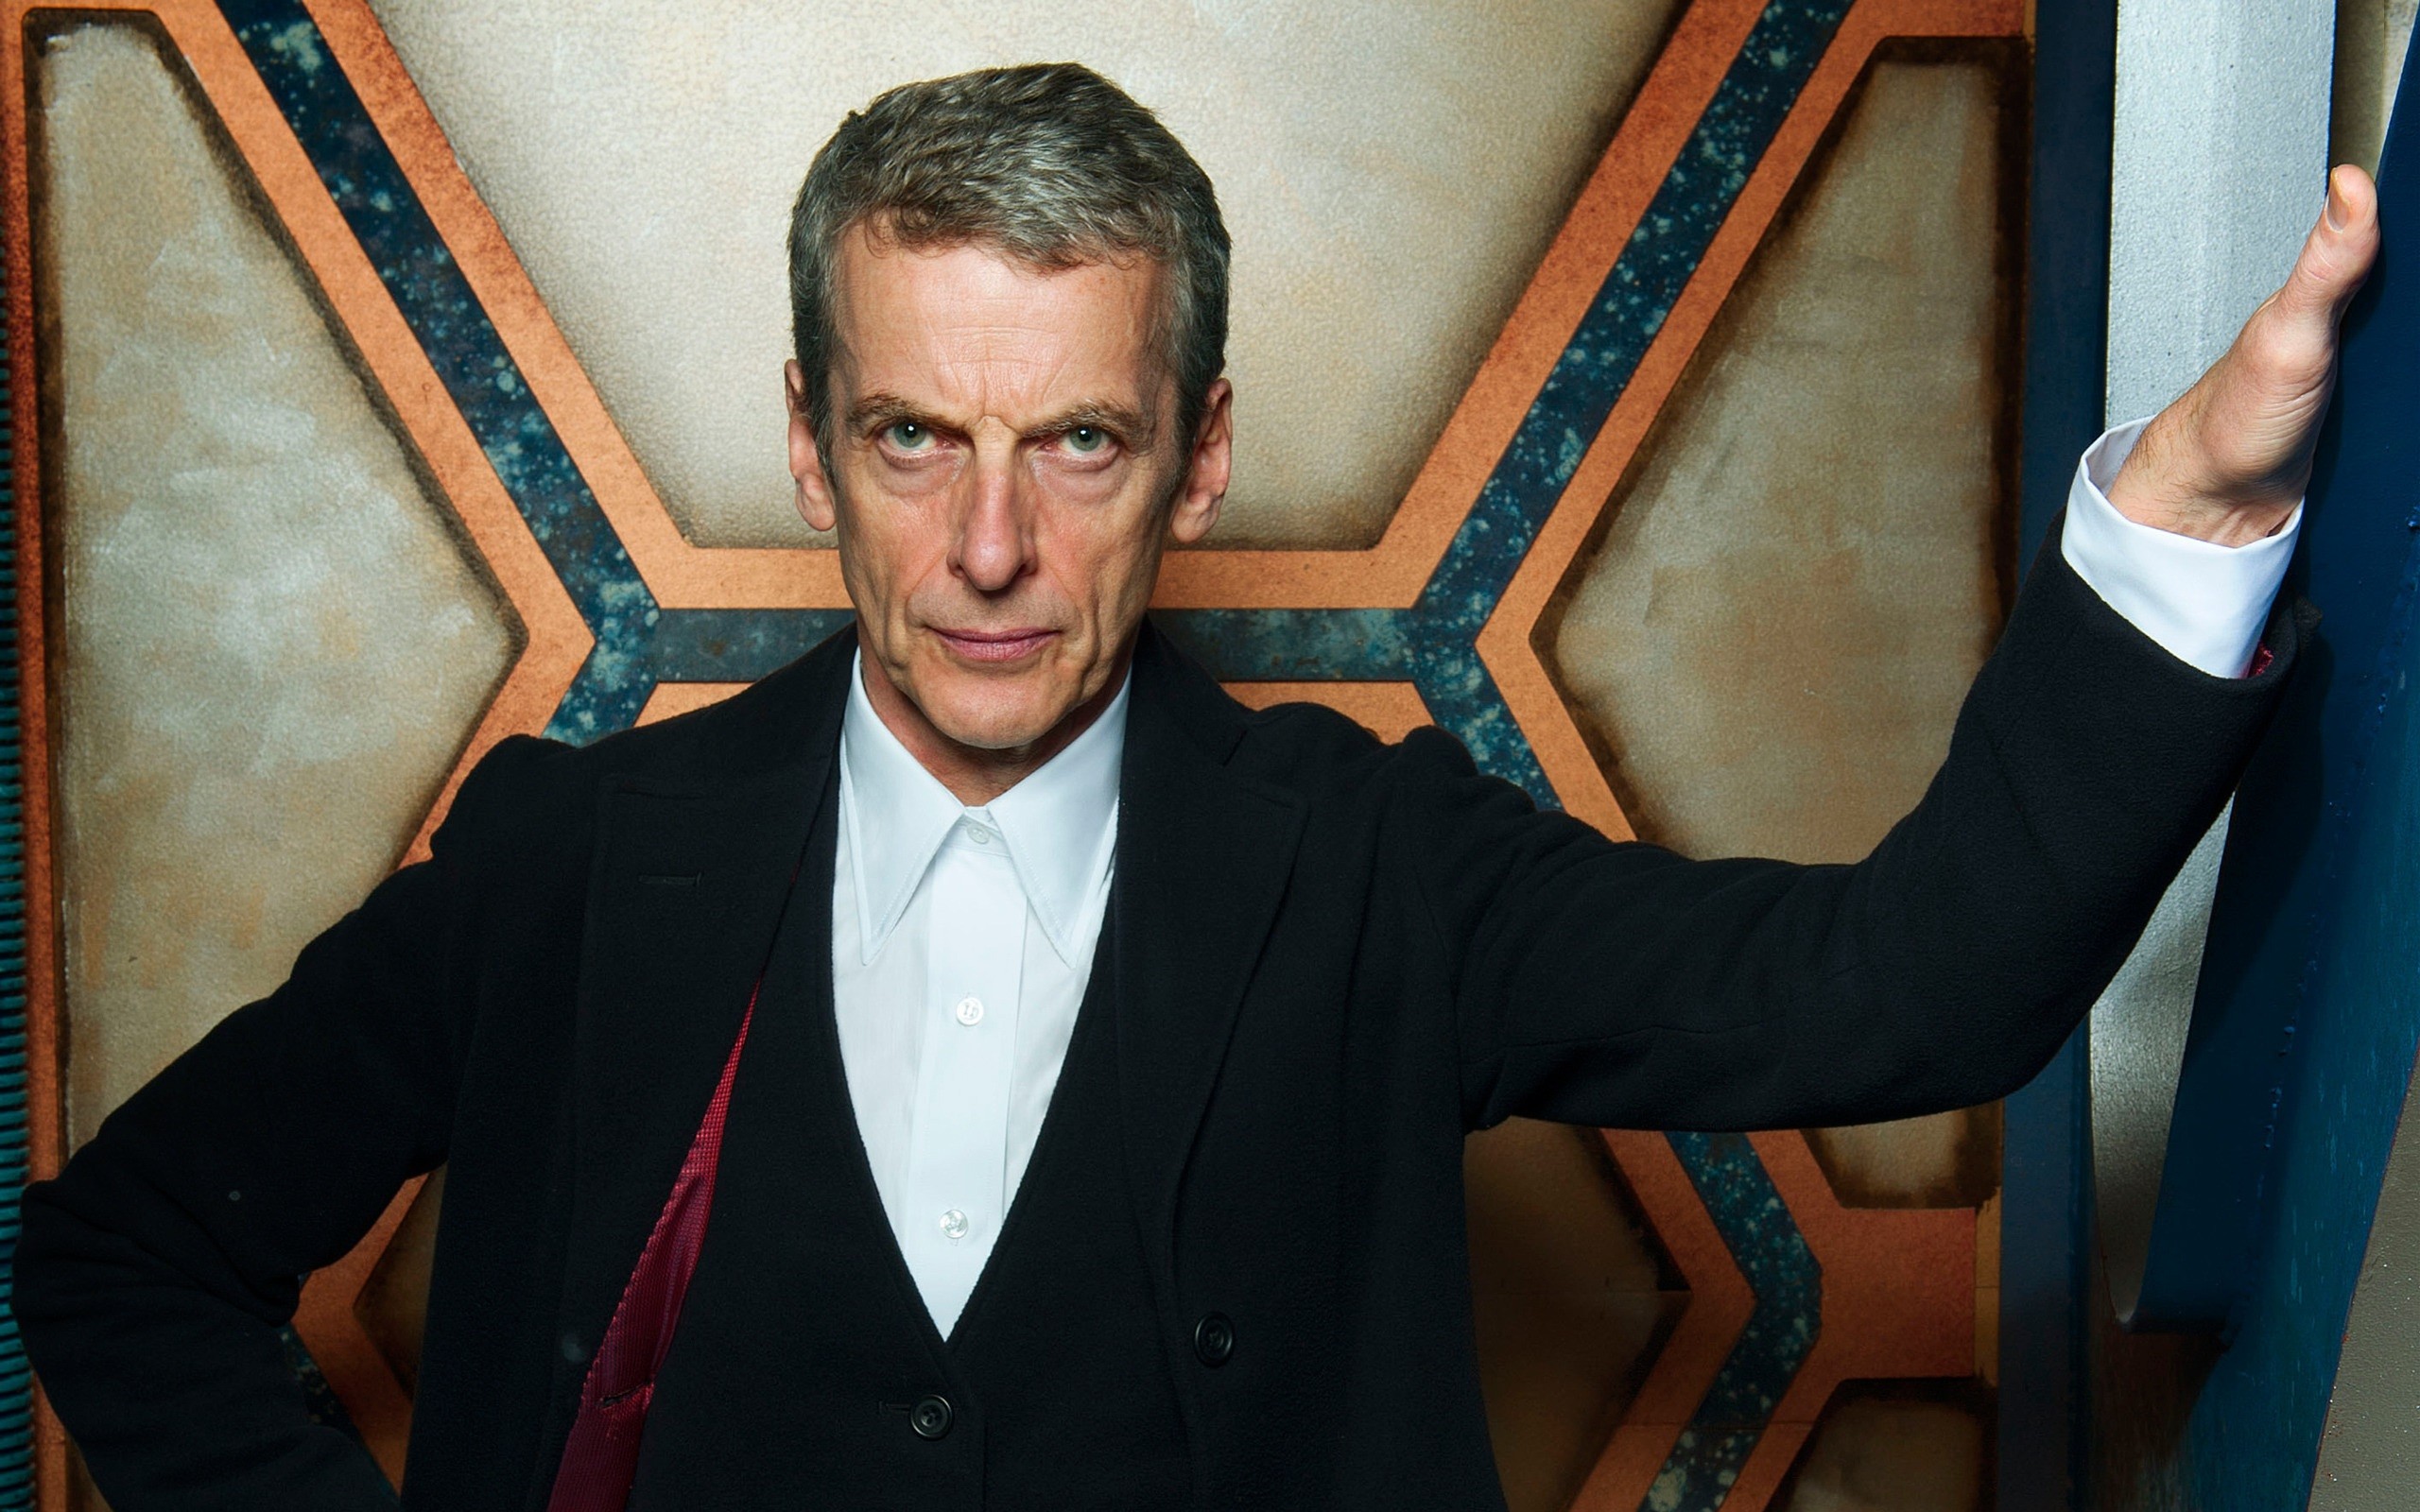 People 2560x1600 Doctor Who The Doctor TARDIS Peter Capaldi actor science fiction BBC TV series men Science Fiction Men